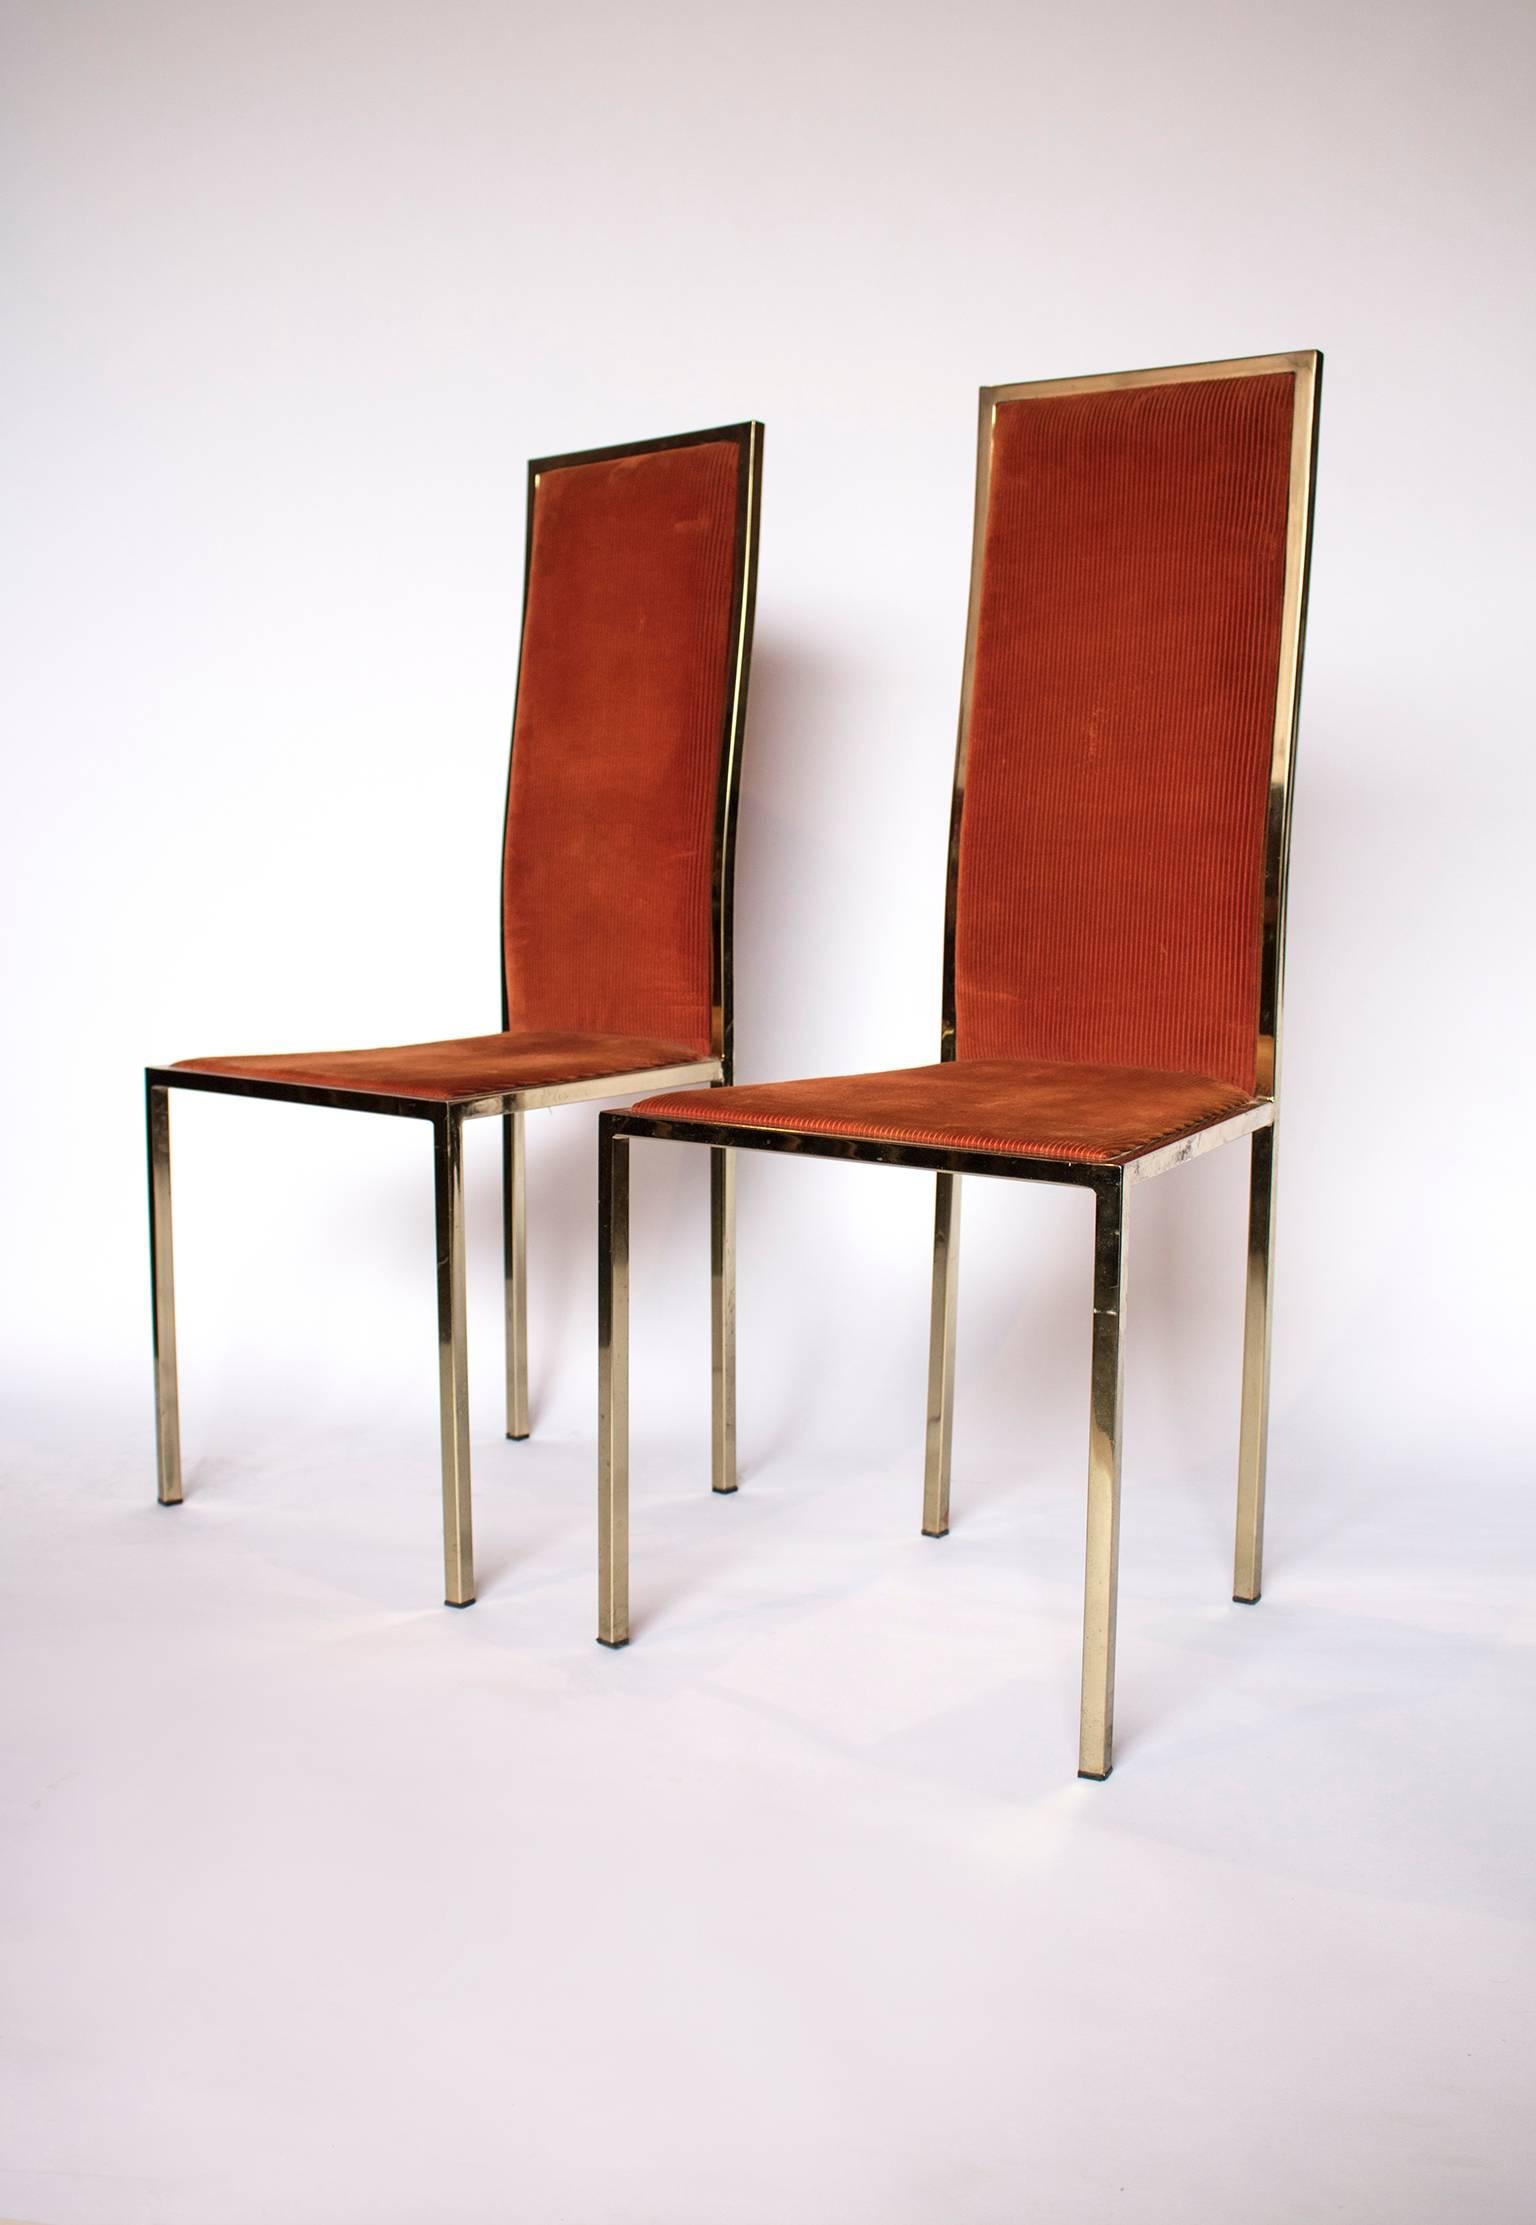 A pair of midcentury brass dining chairs in the Hollywood Regency style, upholstered in burnt orange velvet corduroy fabric, straight narrow brass edged back support with fine square shaped supports.